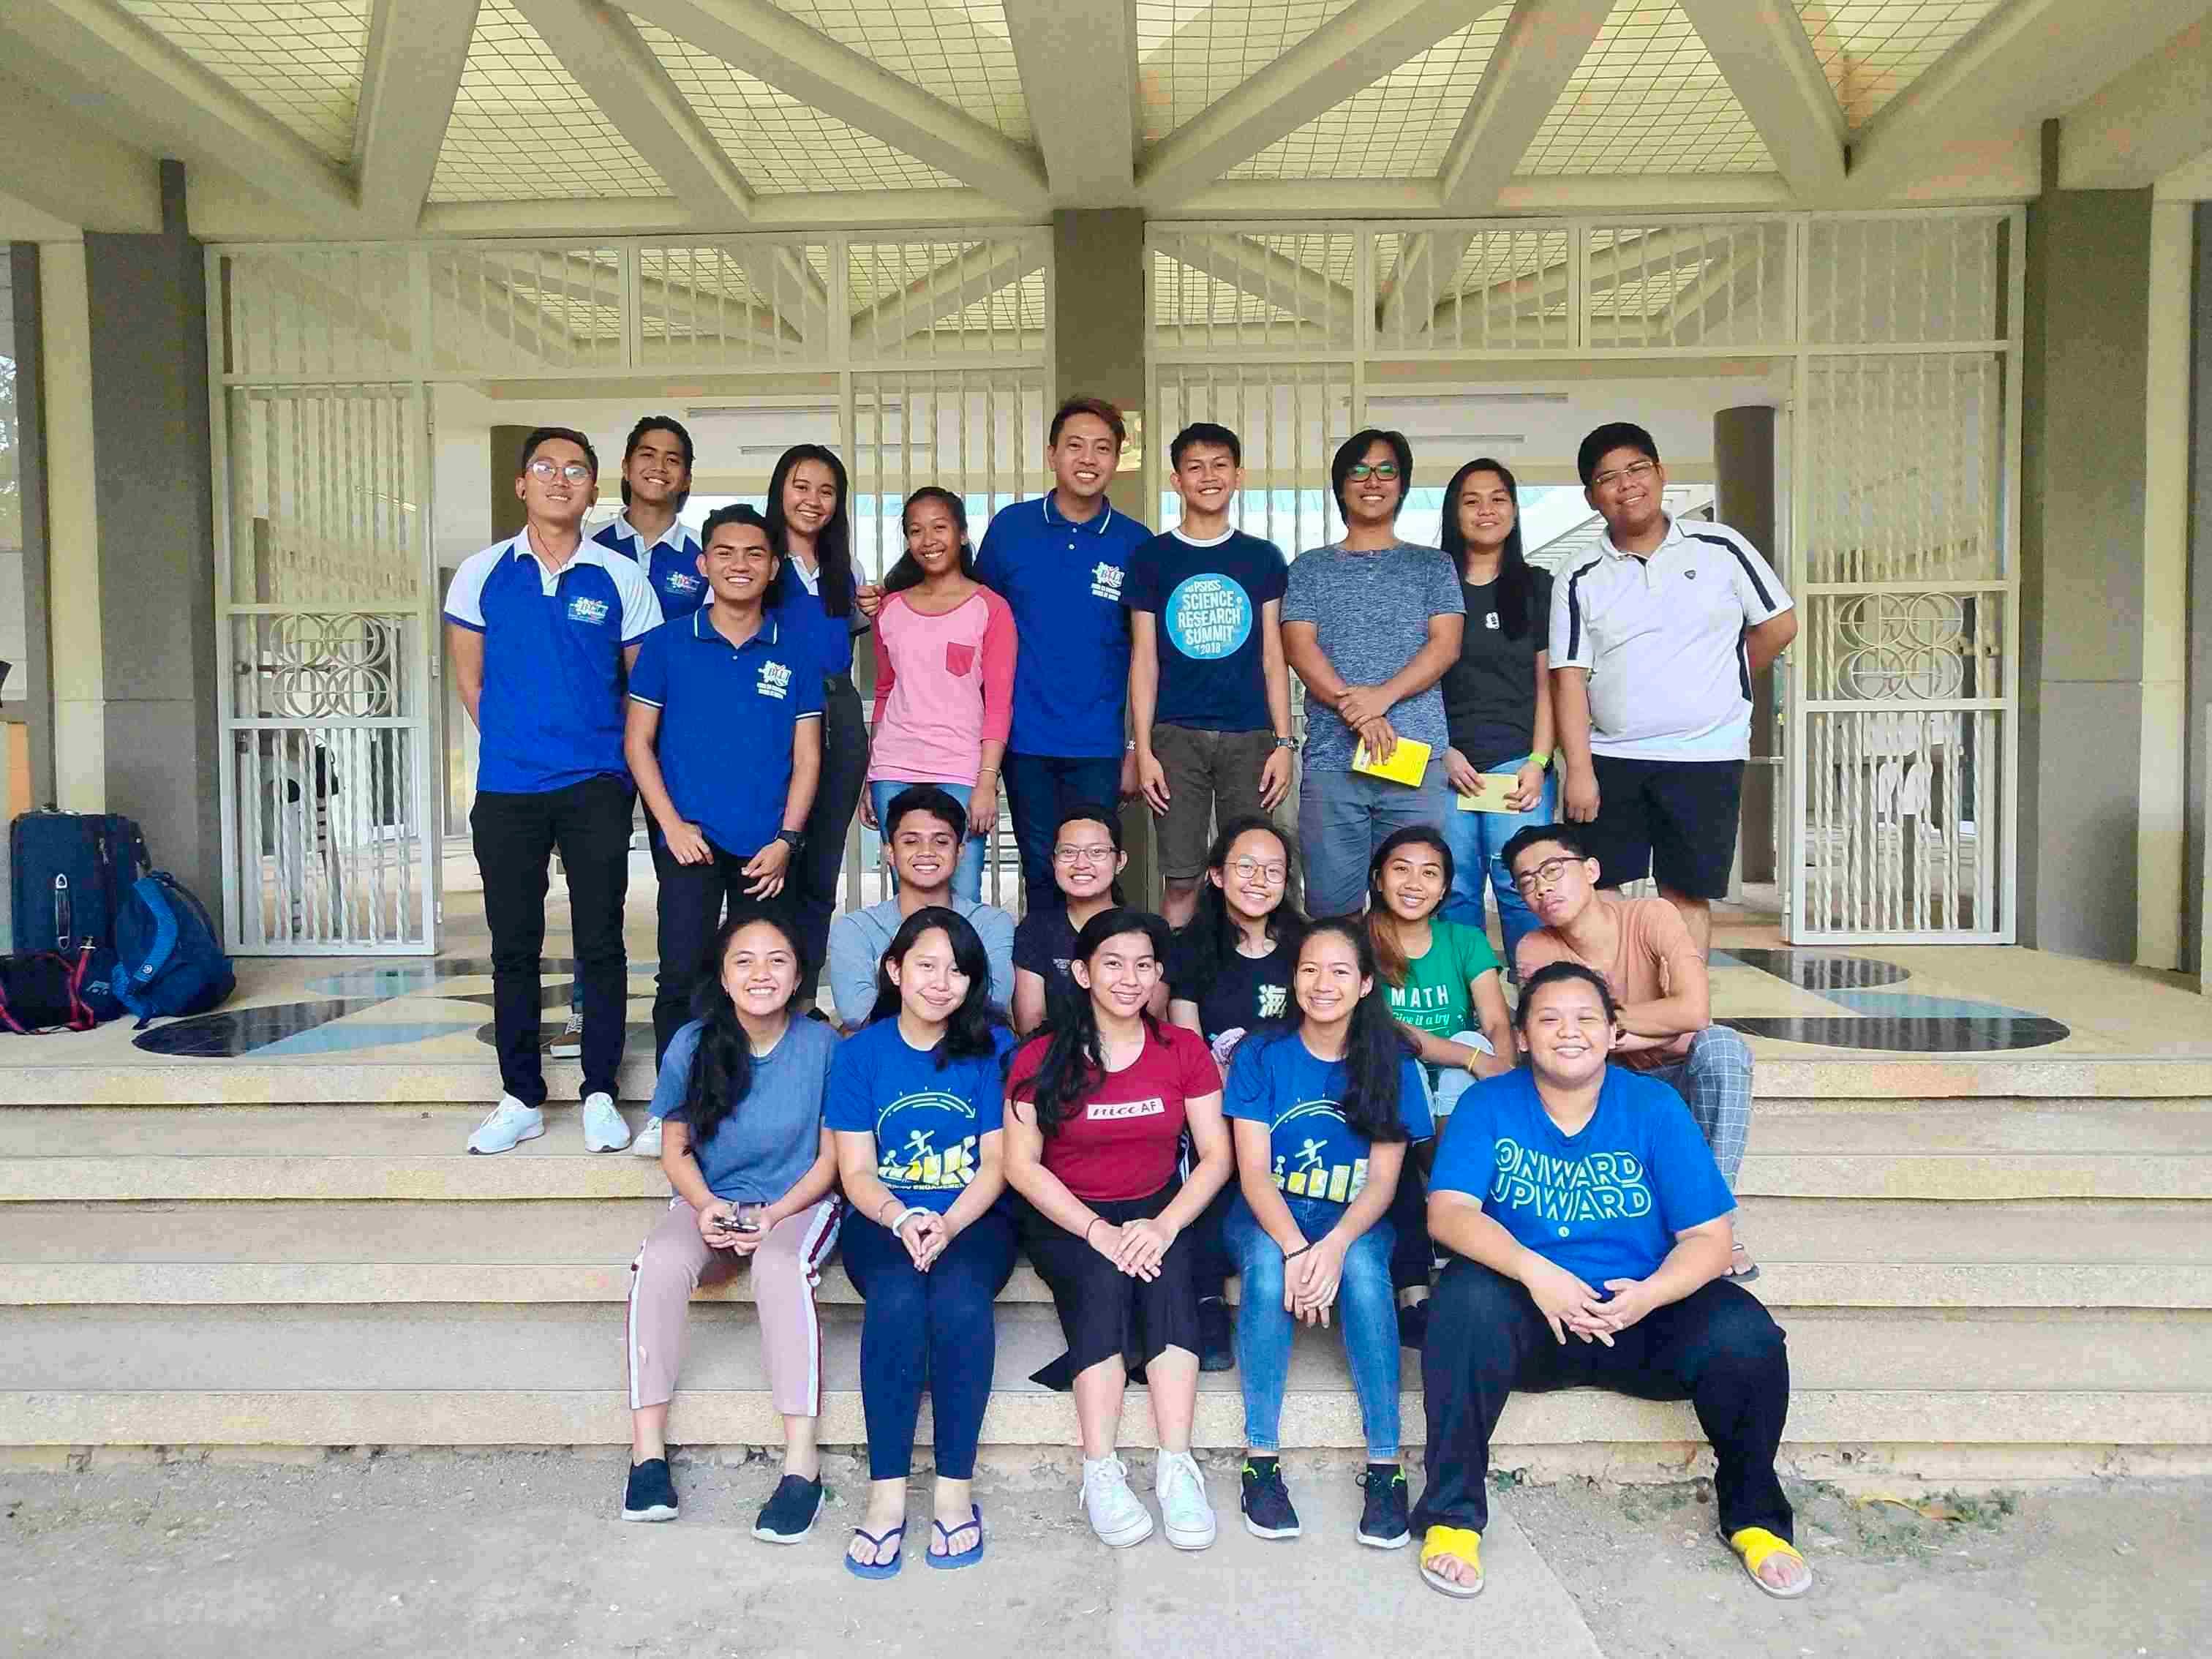 STUDENT LEADER. Aldrean Alogon poses with the PSHS-WVC Student Alliance, the student government body of the school where he served as Vice President - Internal, after a leadership training camp on March 16, 2019. Photo courtesy of Daryl John Libiano.